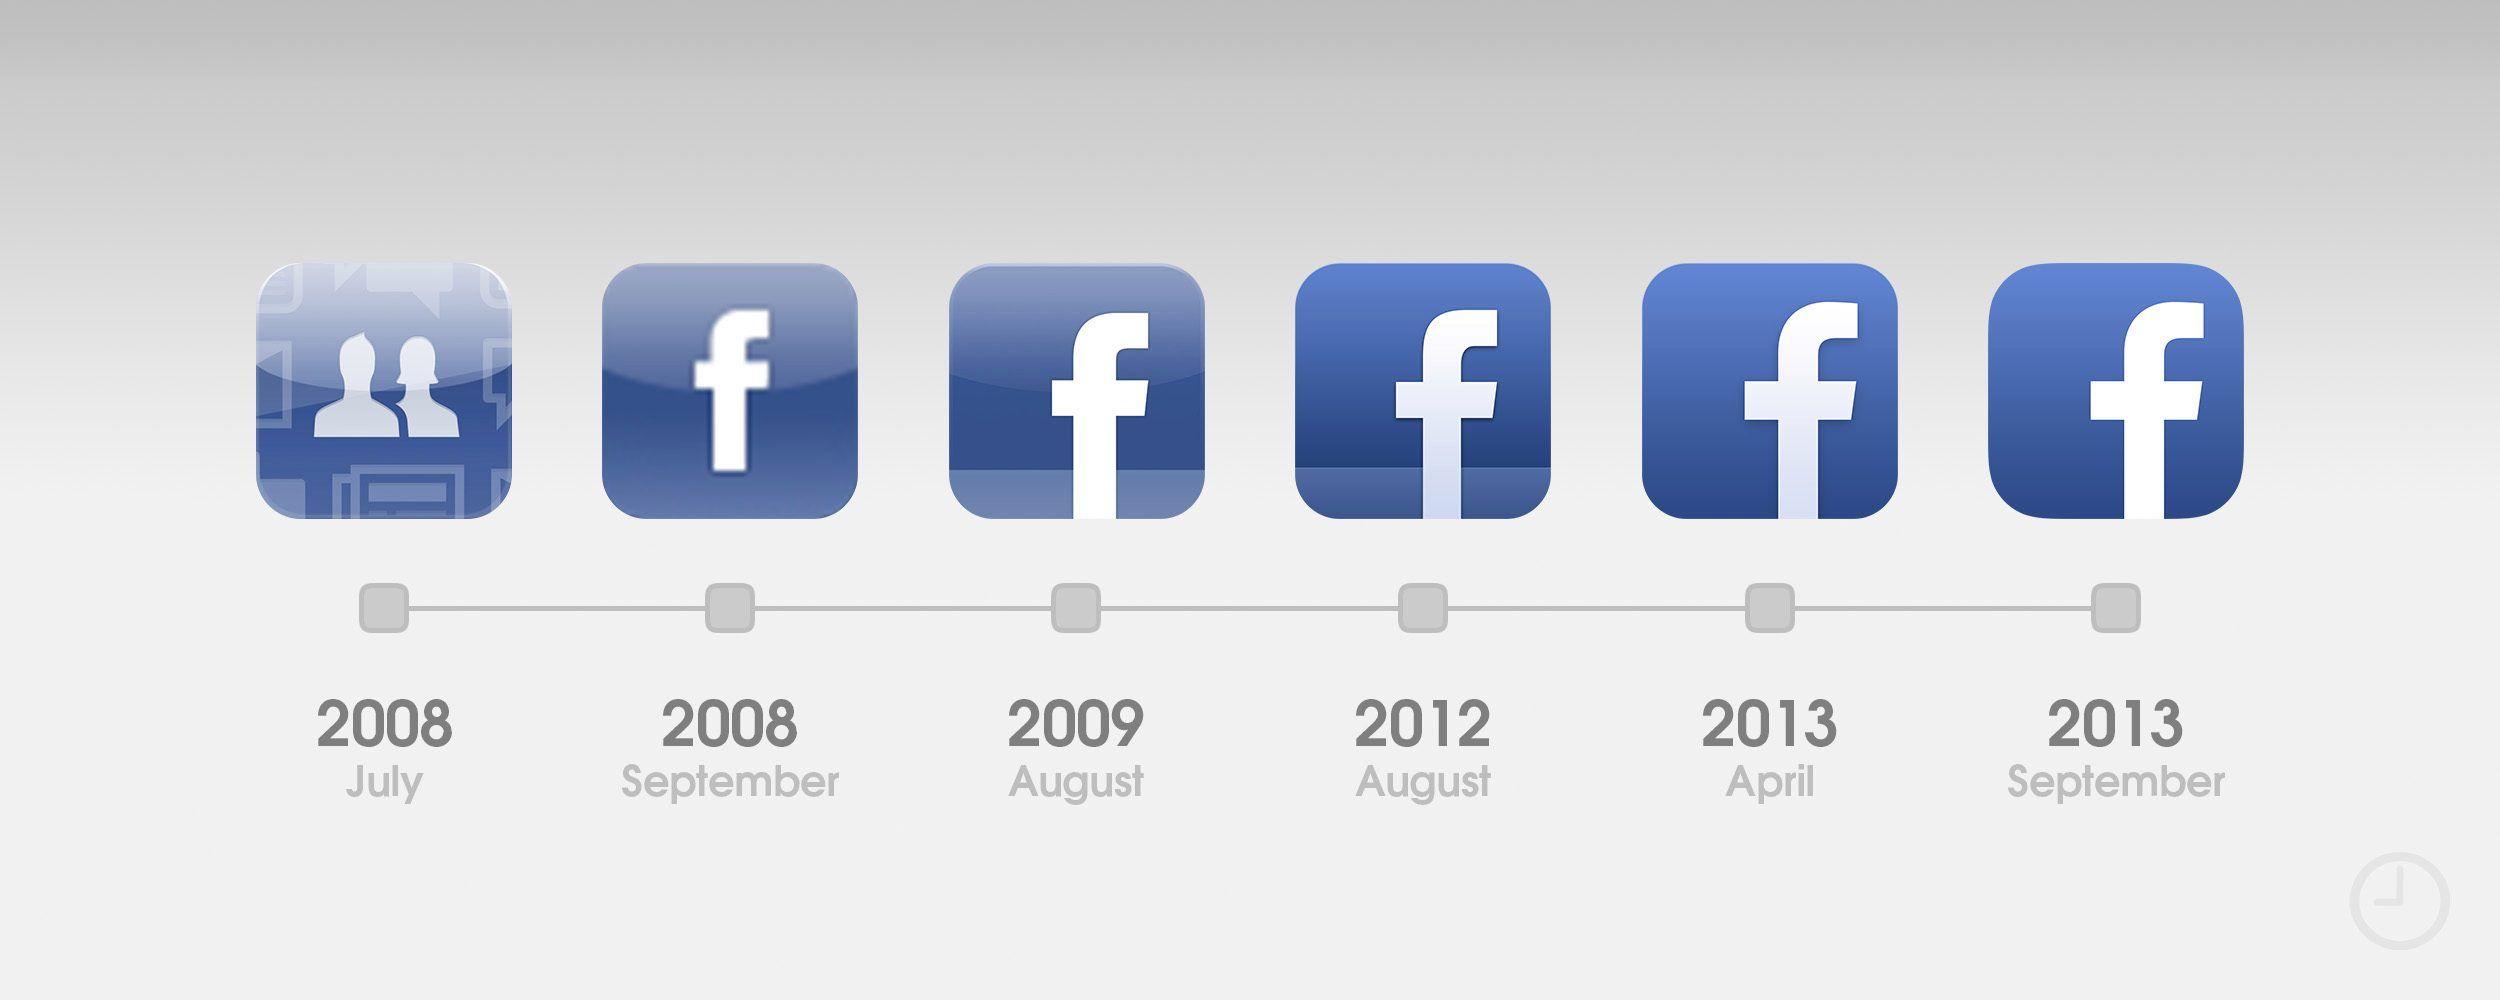 Check in Facebook App Logo - 10 years of the App Store: The design evolution of the earliest apps ...